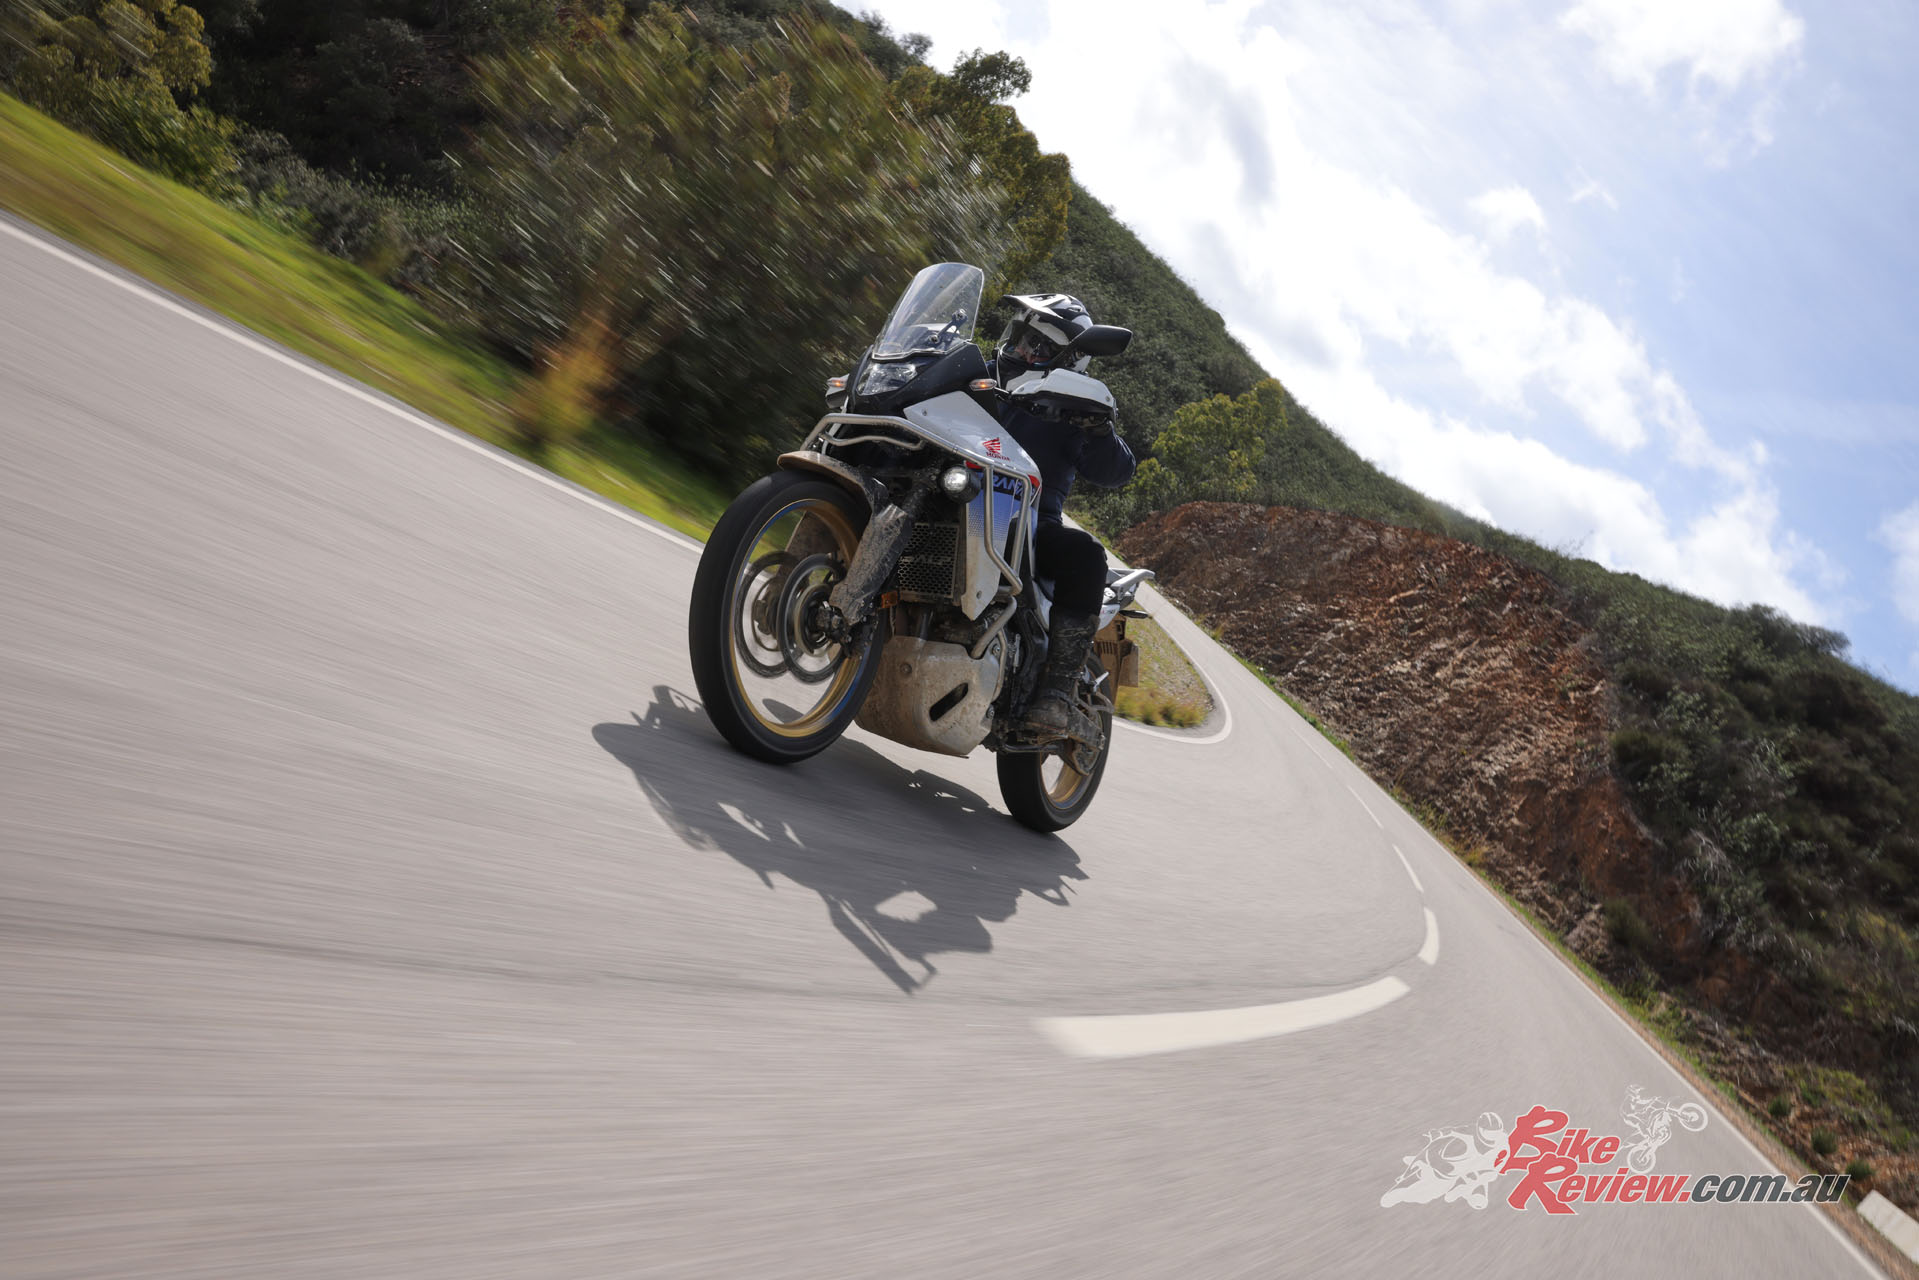 "Soon after getting on it, you feel the Transalp has that Honda-typical do-it-all personality, which given the sort of adventure machine the 750 is, doesn't come as a surprise at all."